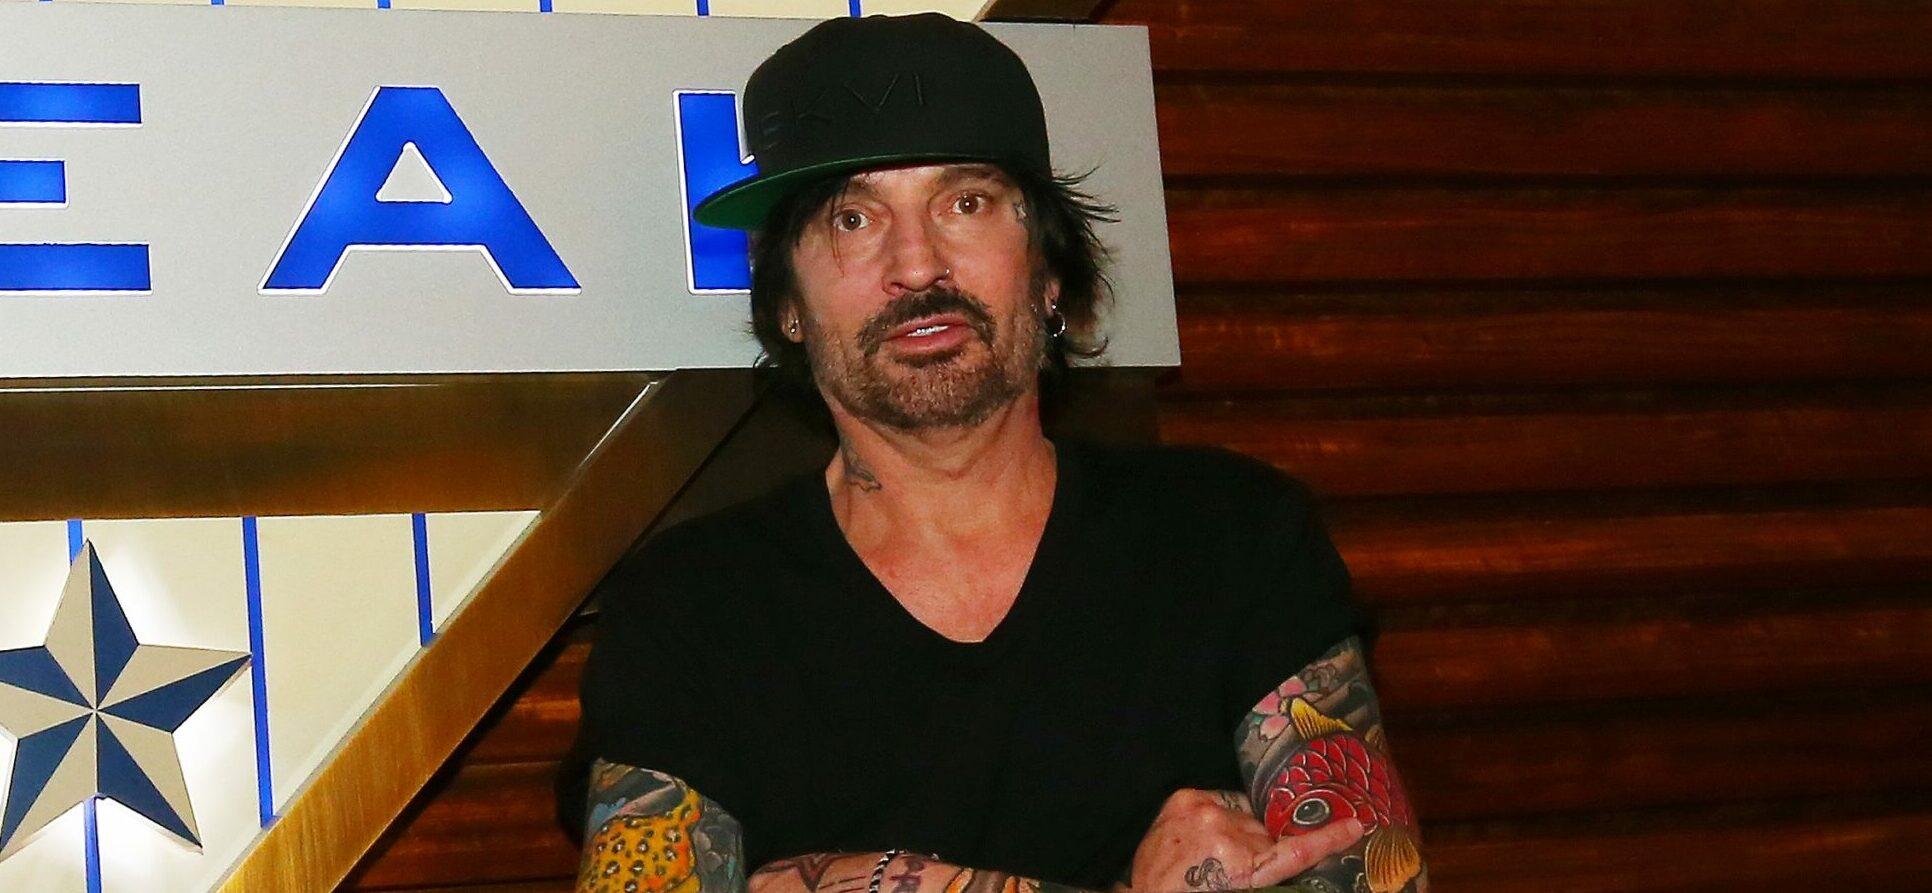 Tommy Lee Shocks Fans AGAIN With Crude NSFW Pic Days After Pamela Anderson’s Memoir Release